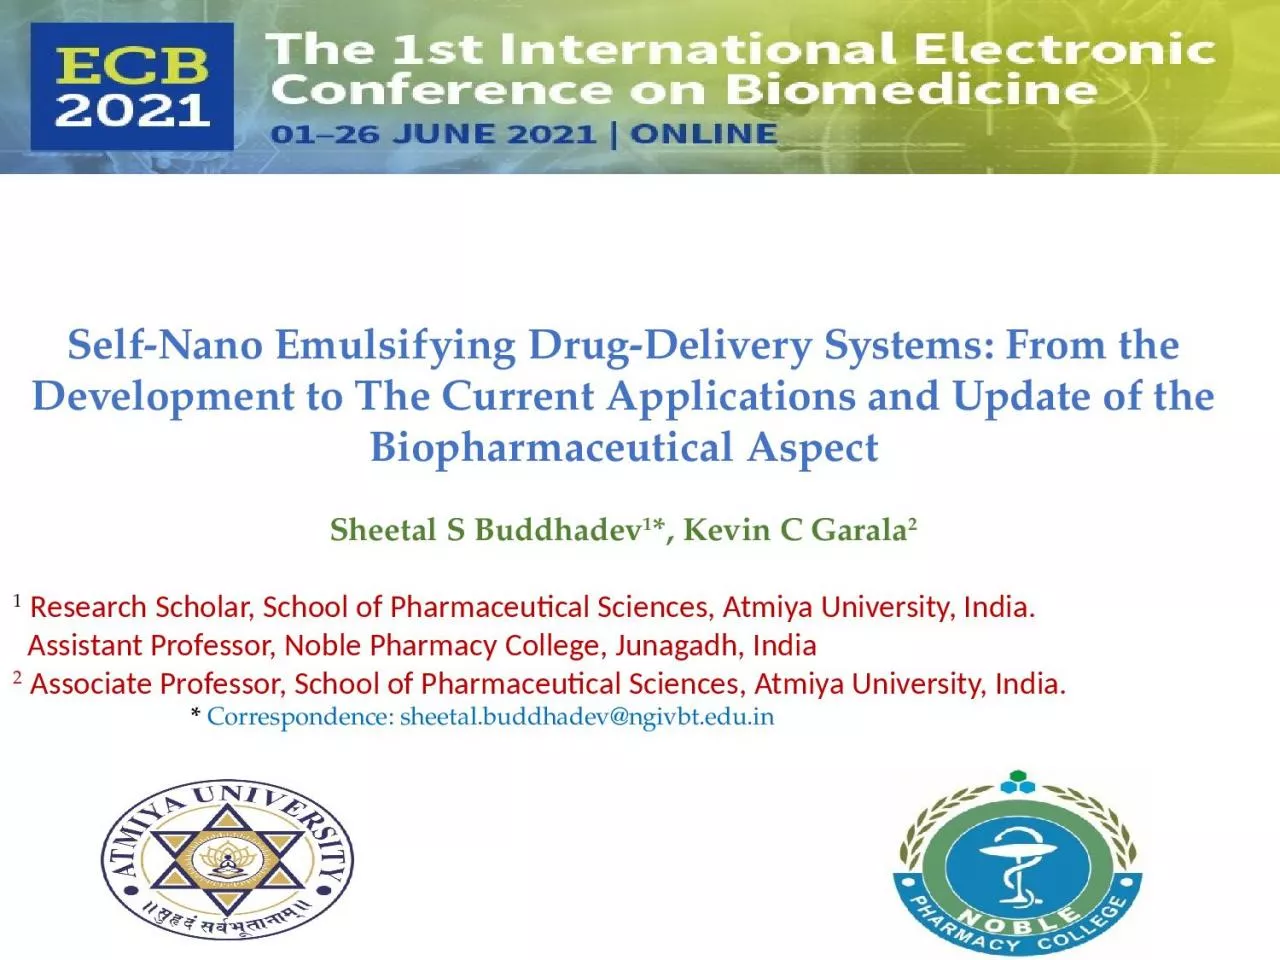 Self-Nano Emulsifying Drug-Delivery Systems: From the Development to The Current Applications